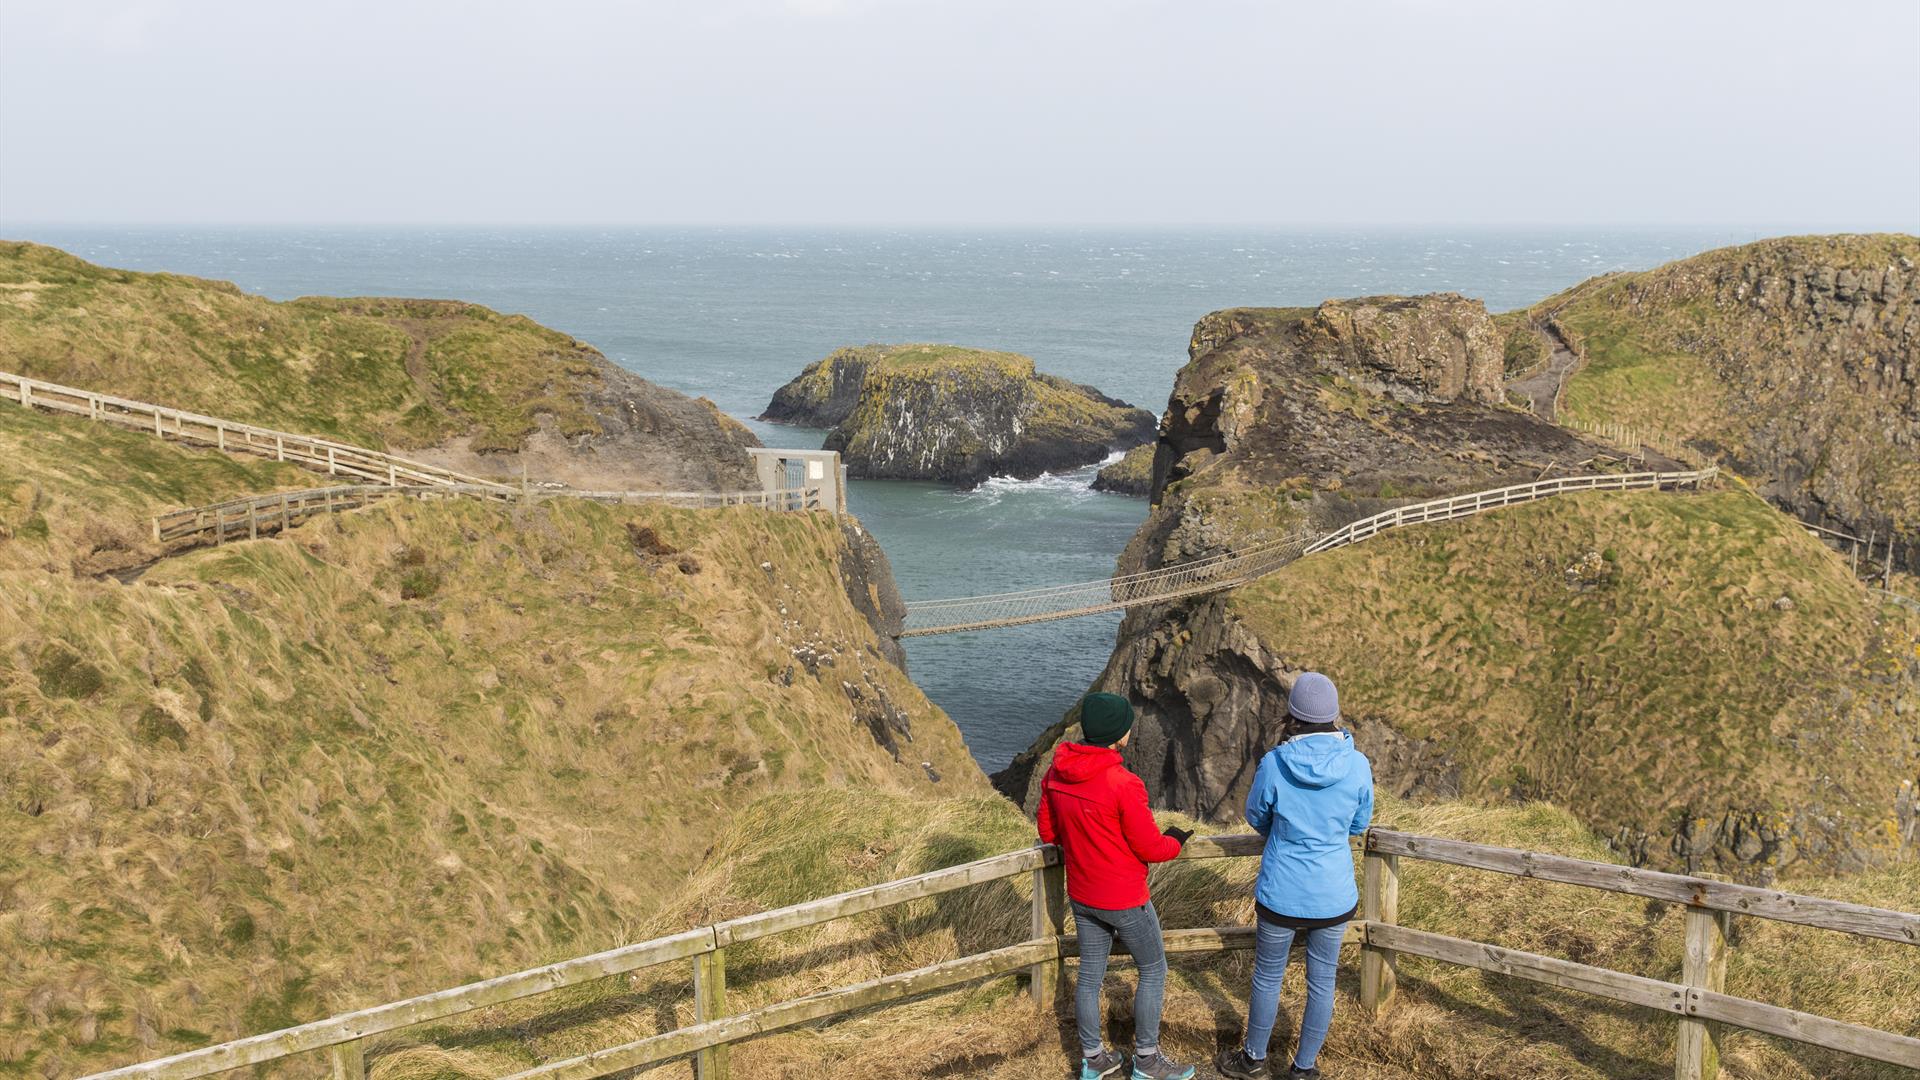 Two visitors admiring the views at Carrick-a-Rede